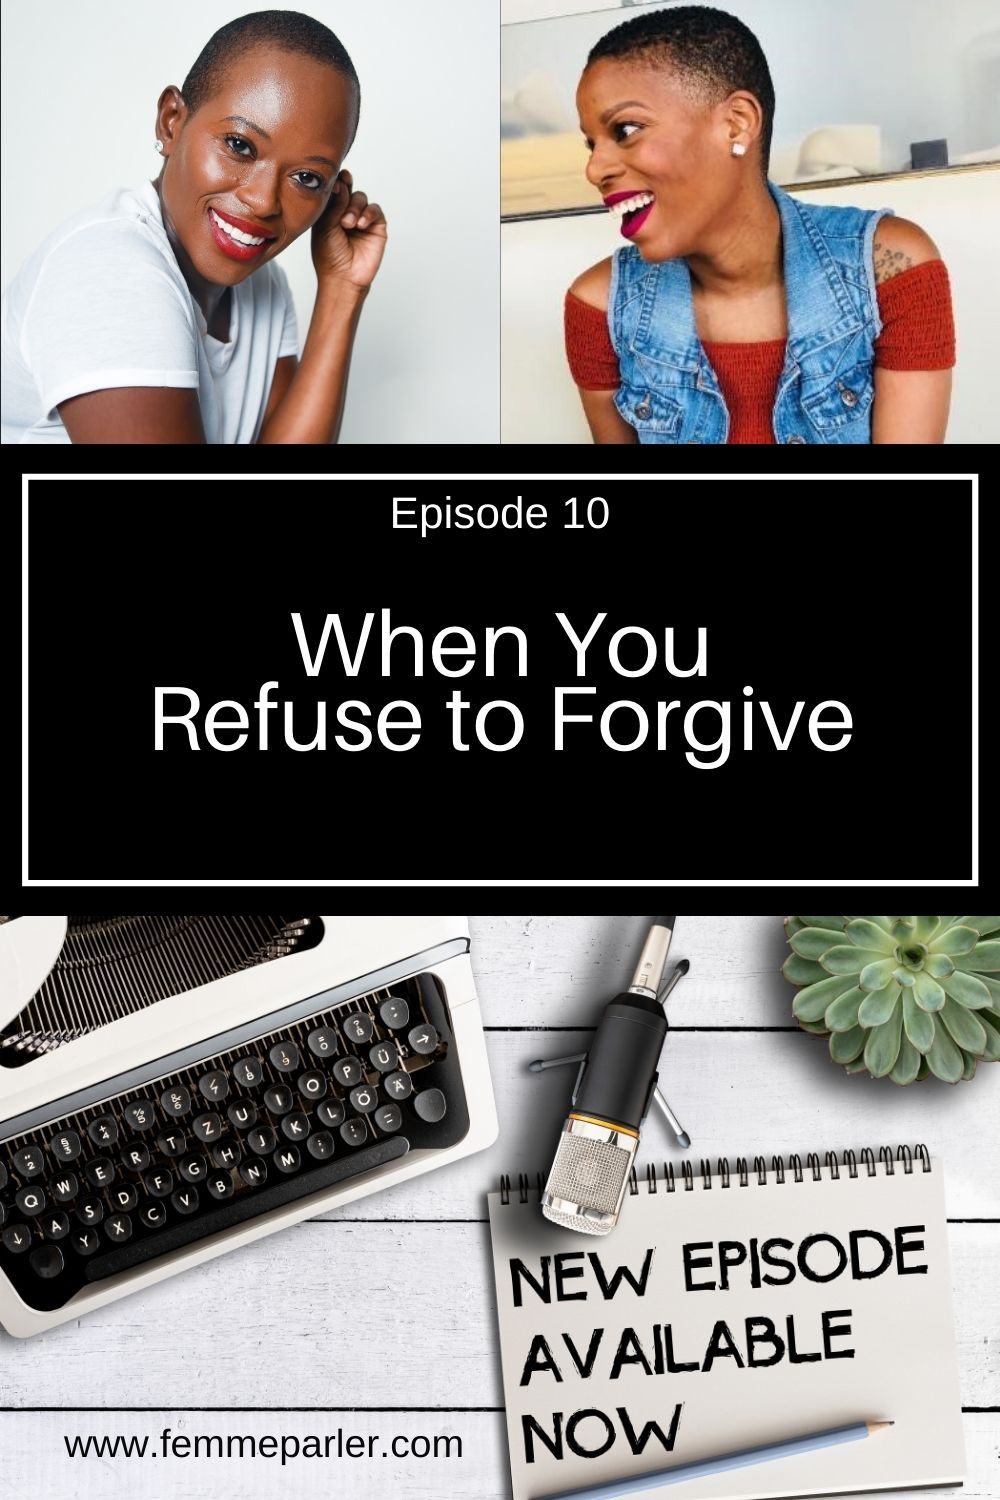 When You Refuse to Forgive